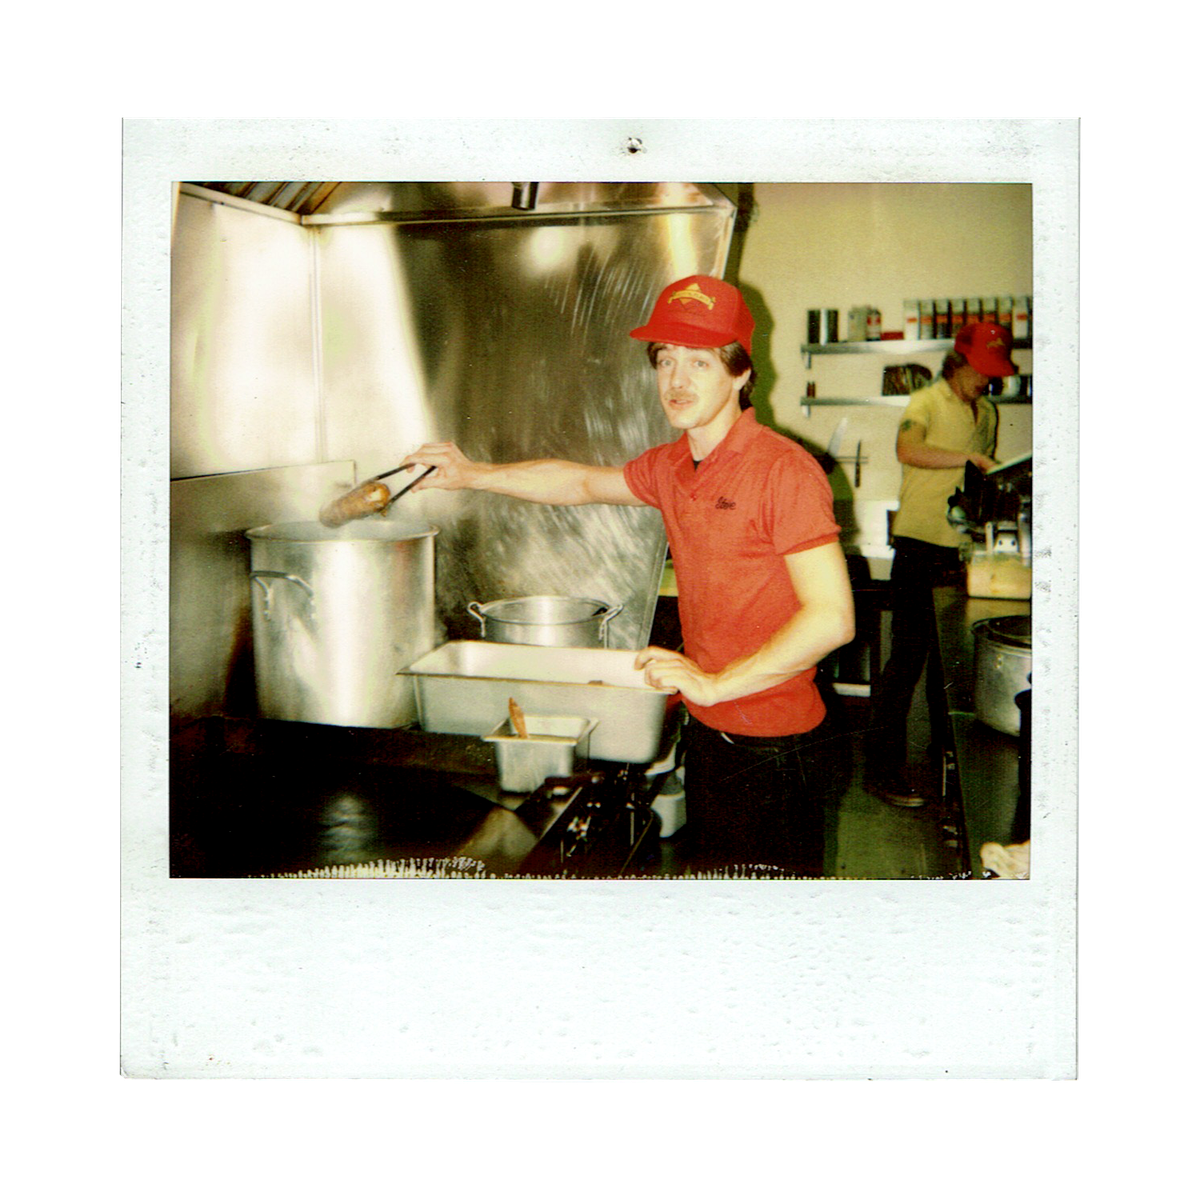 A polaroid of an old photo of a cook in a diner.